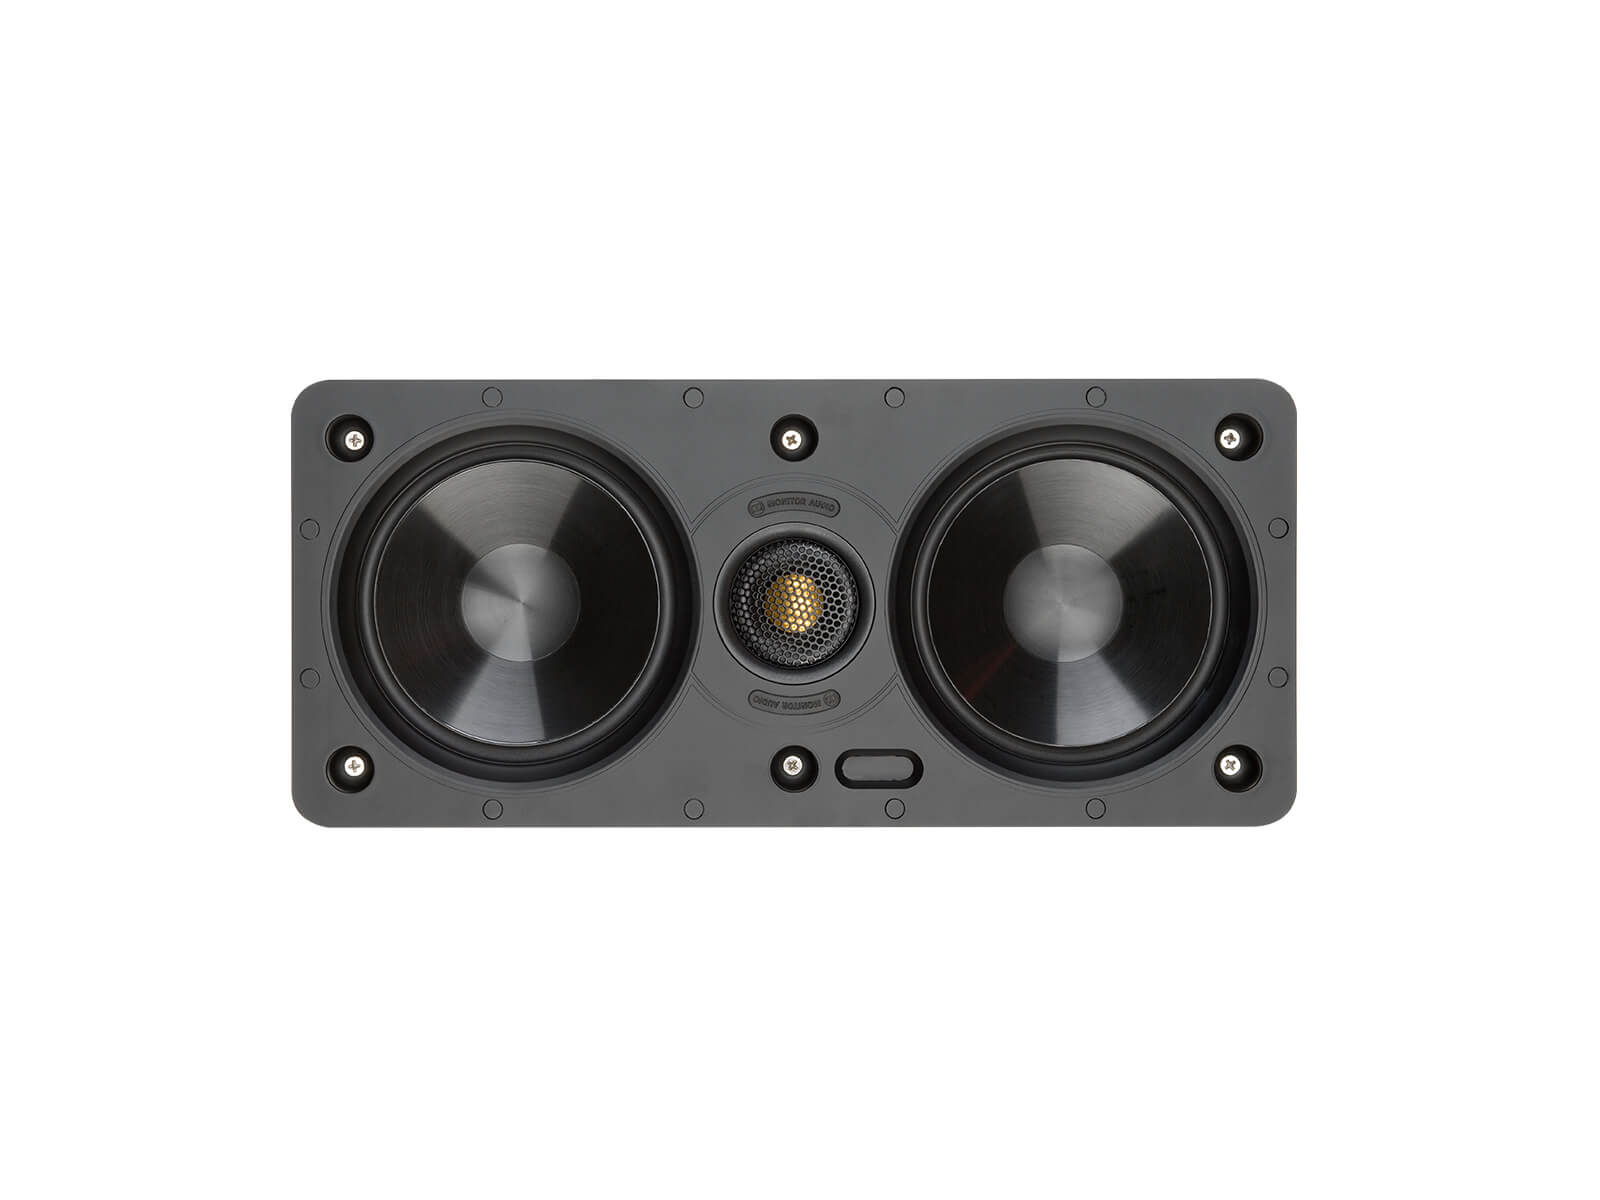 Core W150-LCR, front-on, grille-less in-wall speakers.